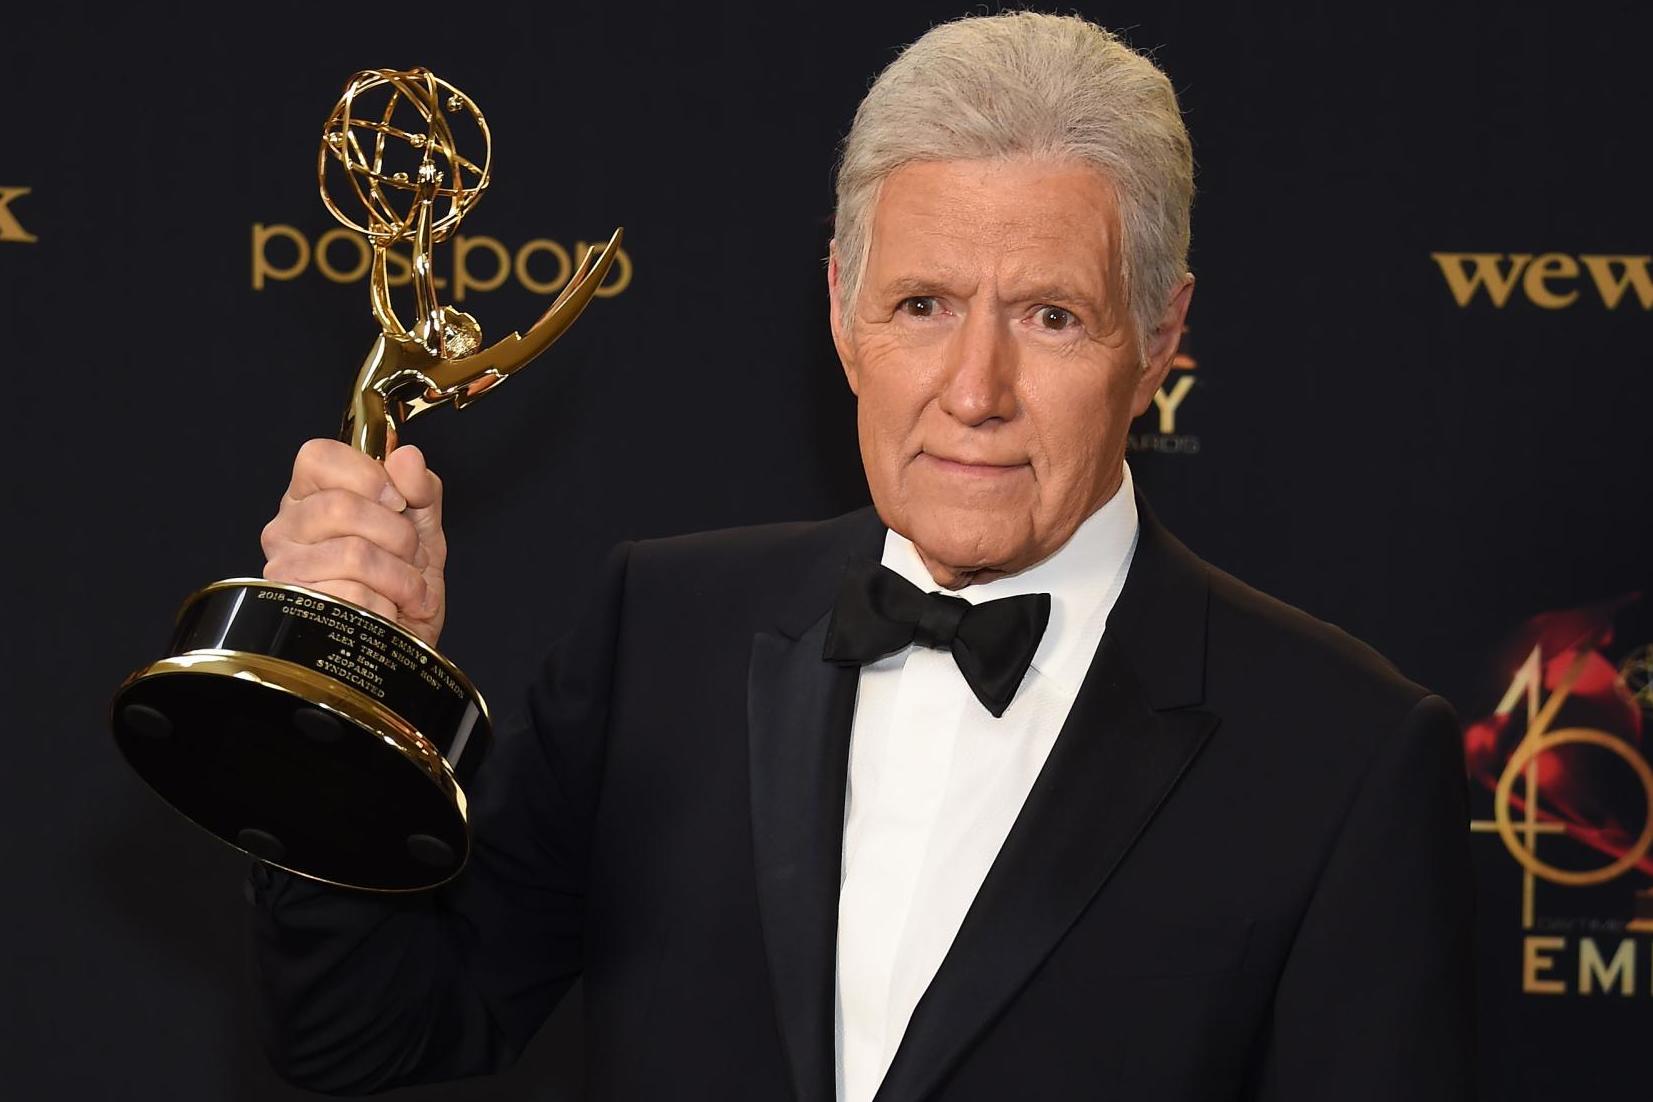 Alex Trebek poses with his Daytime Emmy for Outstanding Game Show Host on 5 May, 2019 in Pasadena, California.